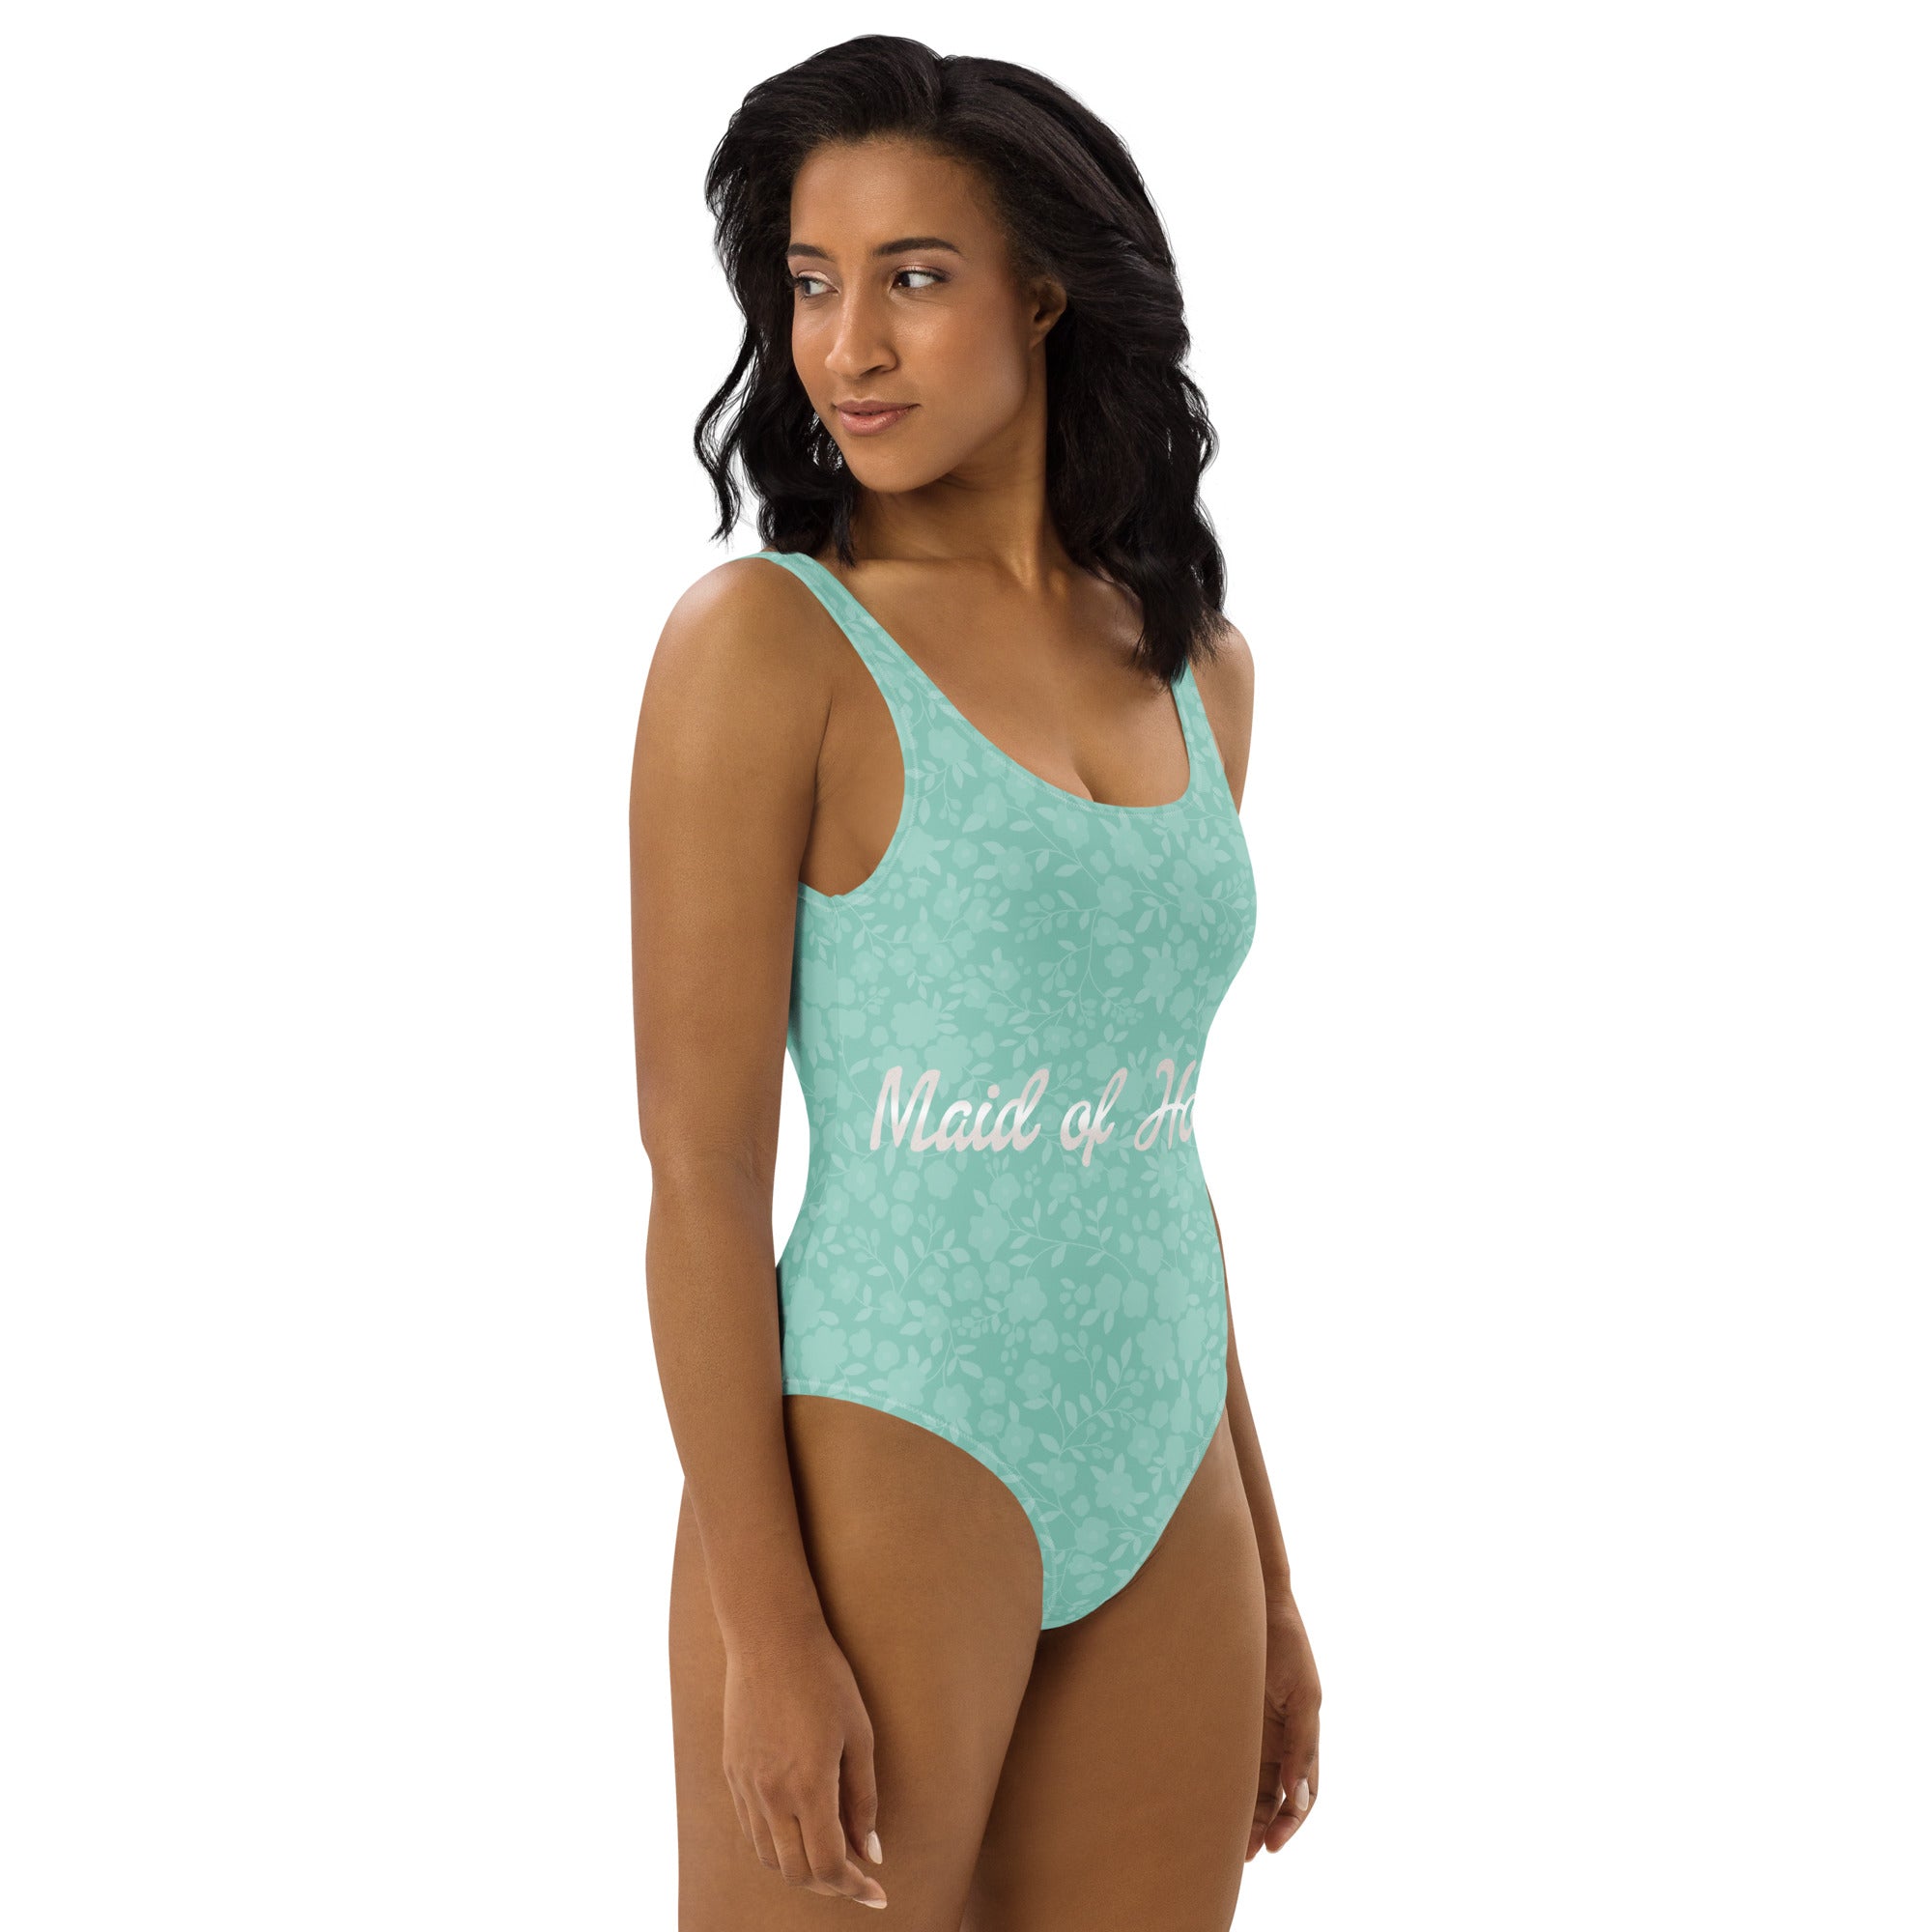 Maid of Honor One-Piece Swimsuit